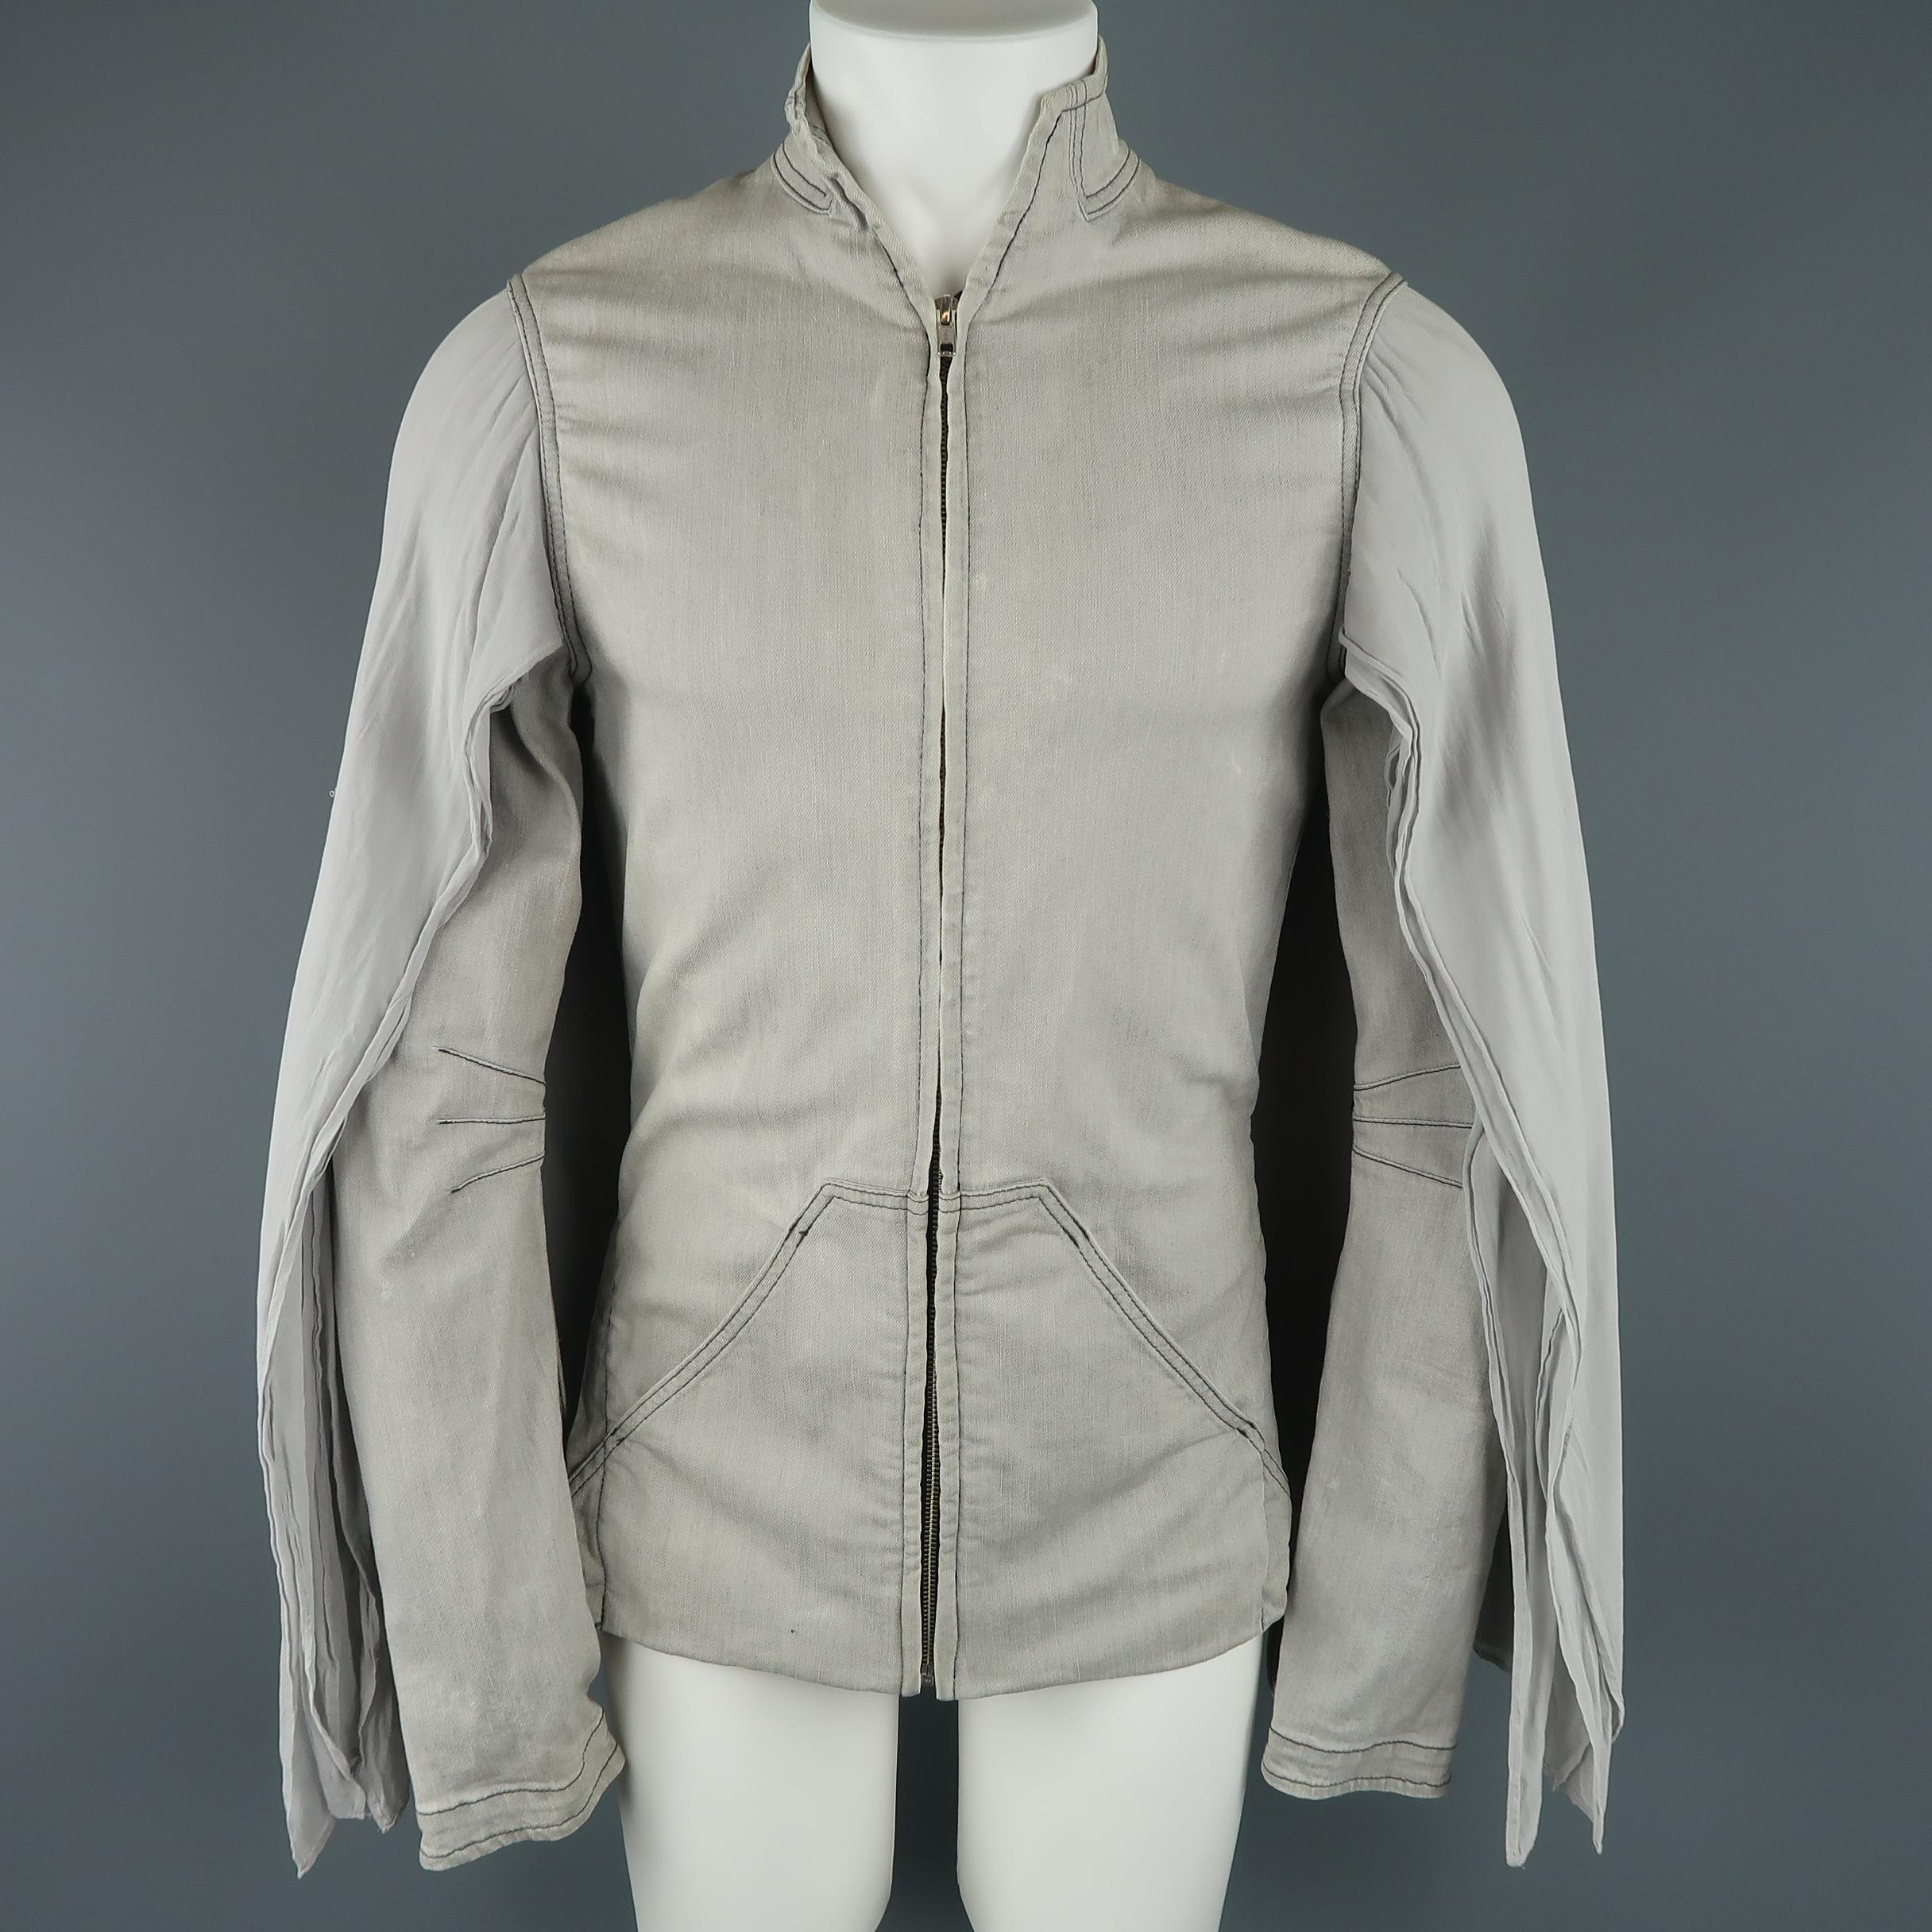 GARETH PUGH jacket comes in light gray washed denim with a high collar, zip front, pouch pockets, fitted sleeves with bondage strap, and layered cape overlay. Wear and discolorations throughout. As-is.Made in Italy.
 
Fair Pre-Owned